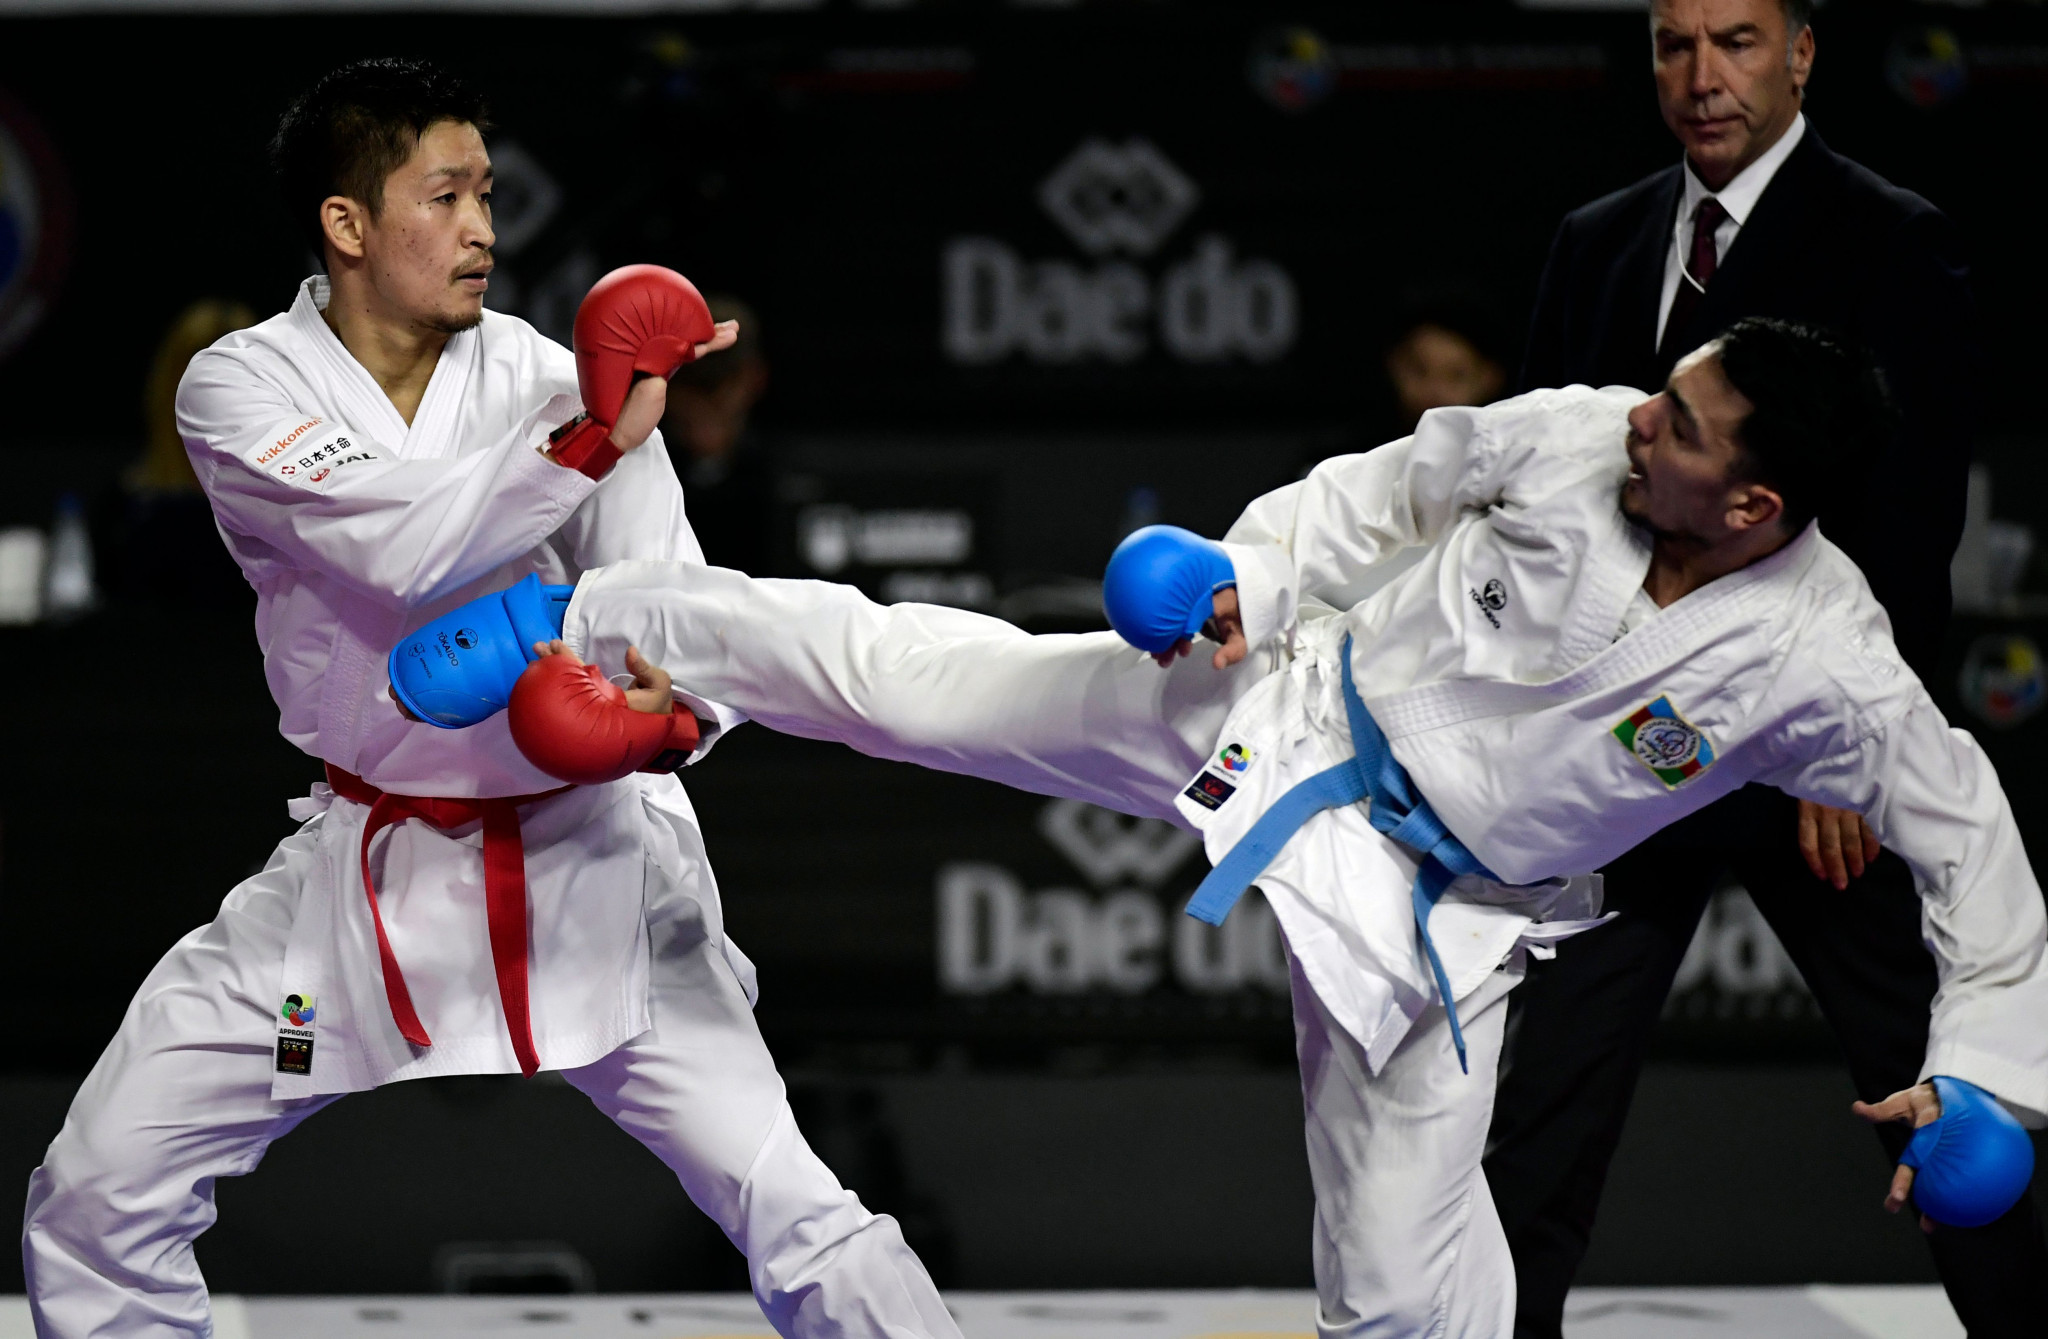 WKF publishes simplified version of COVID-19 guidelines